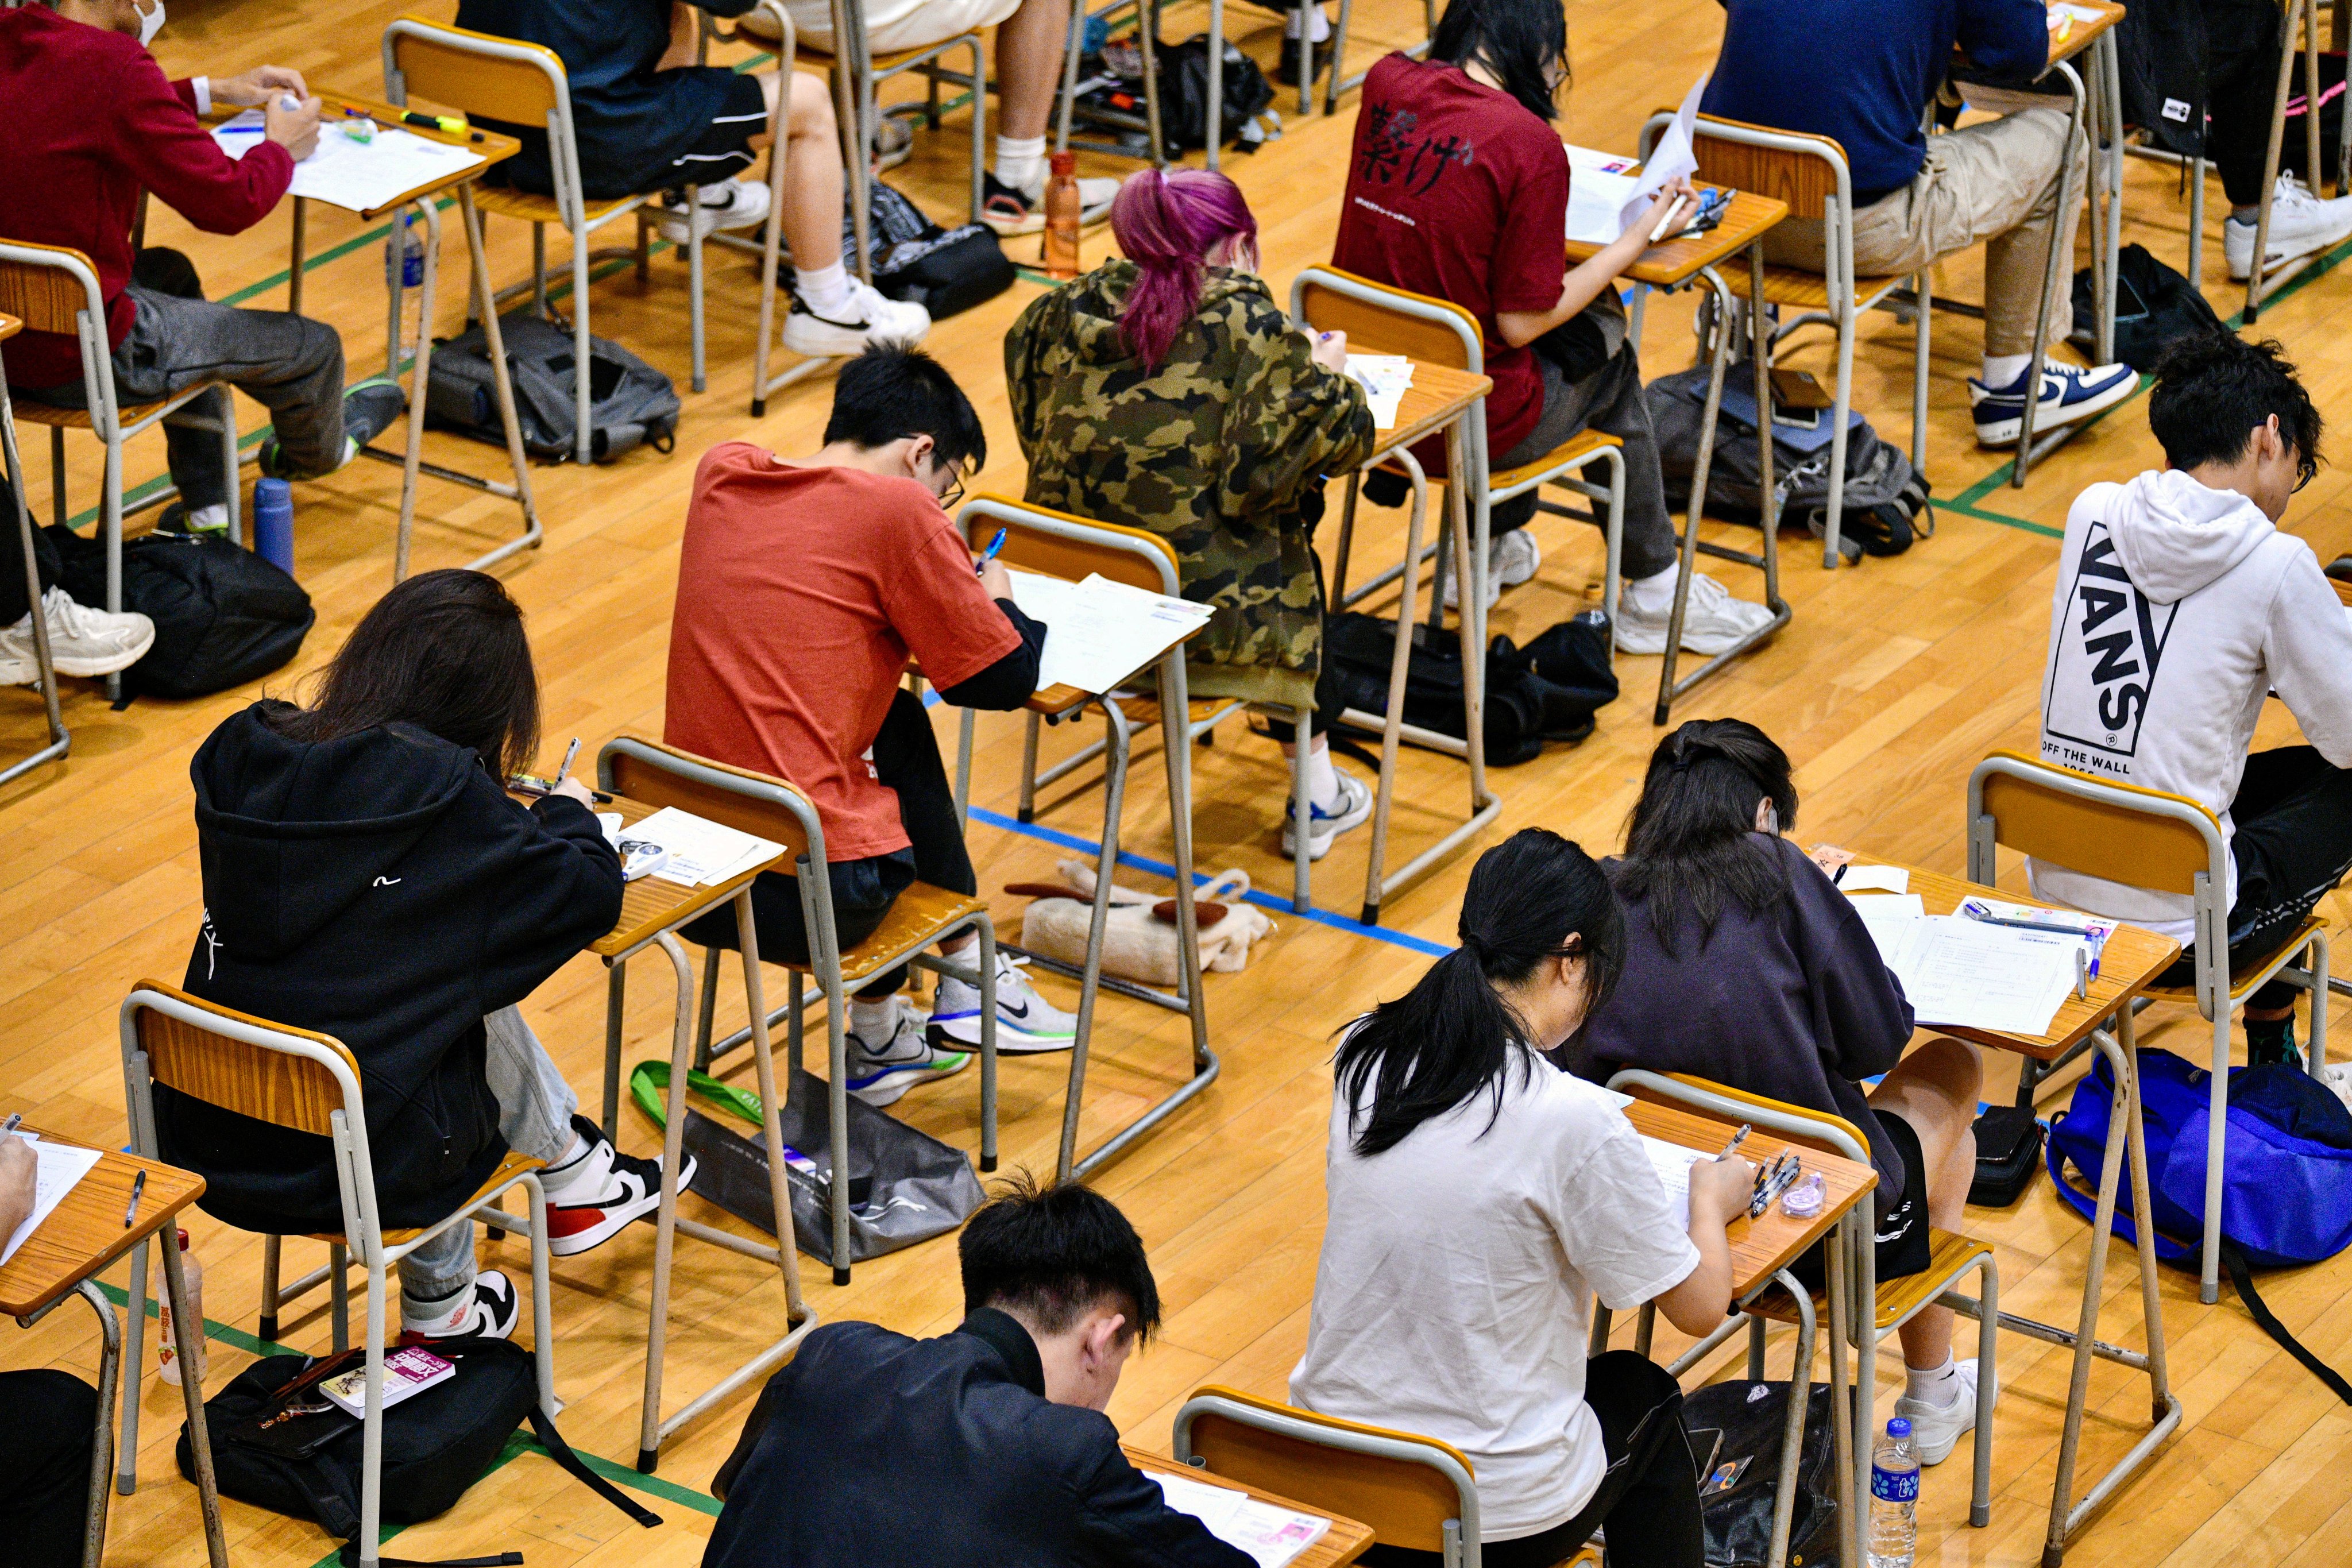 Students sit DSE exams. According to the Hong Kong Examinations and Assessment Authority, 5,852 DSE exam takers took the Chinese history test this year. Photo: Handout